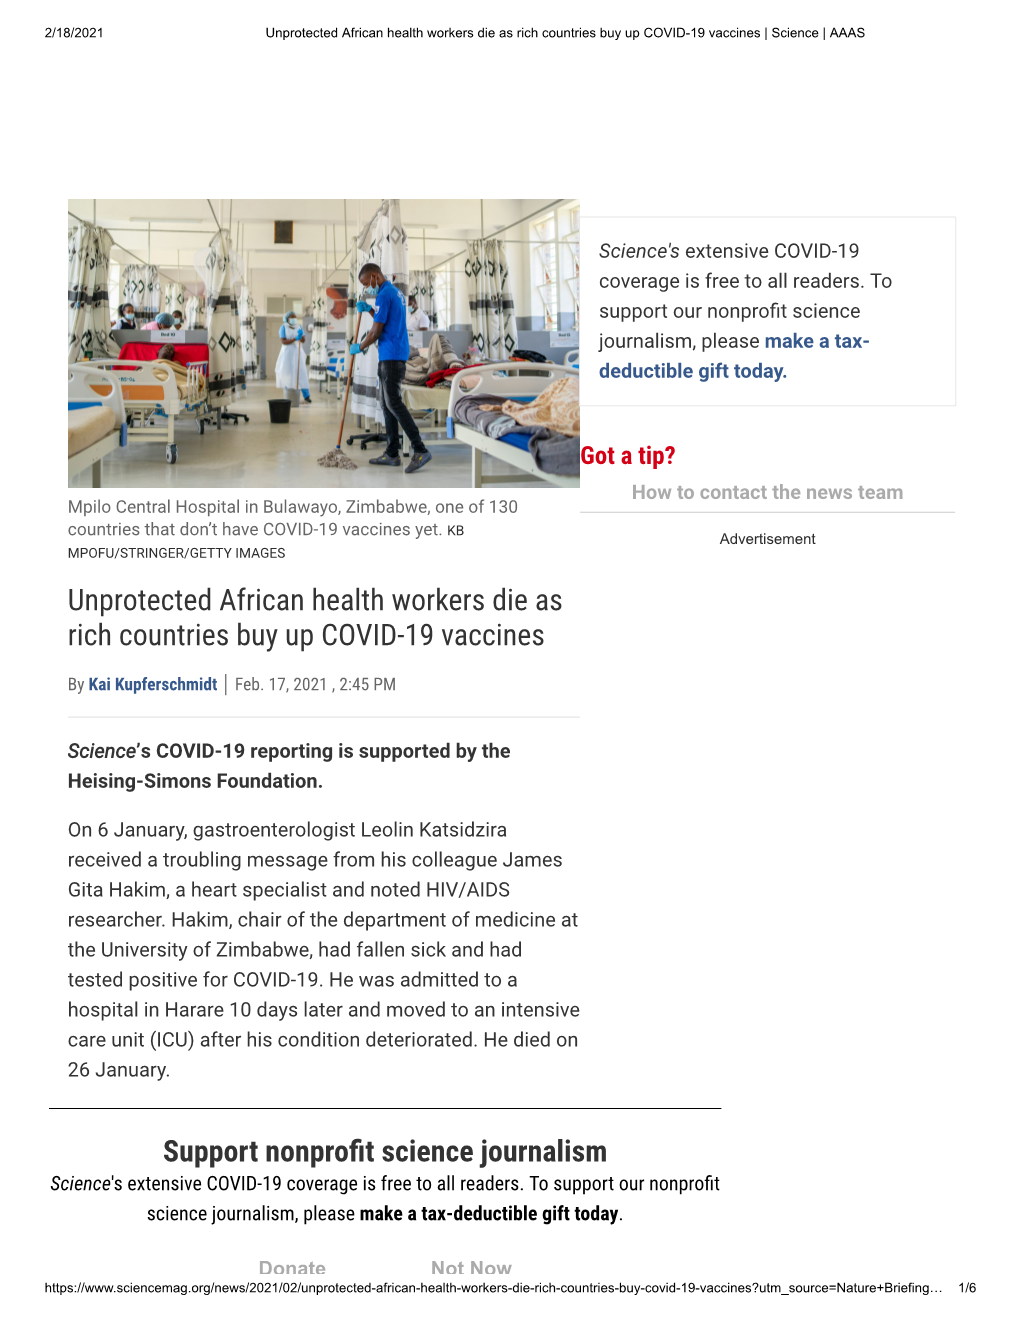 Unprotected African Health Workers Die As Rich Countries Buy up COVID-19 Vaccines | Science | AAAS